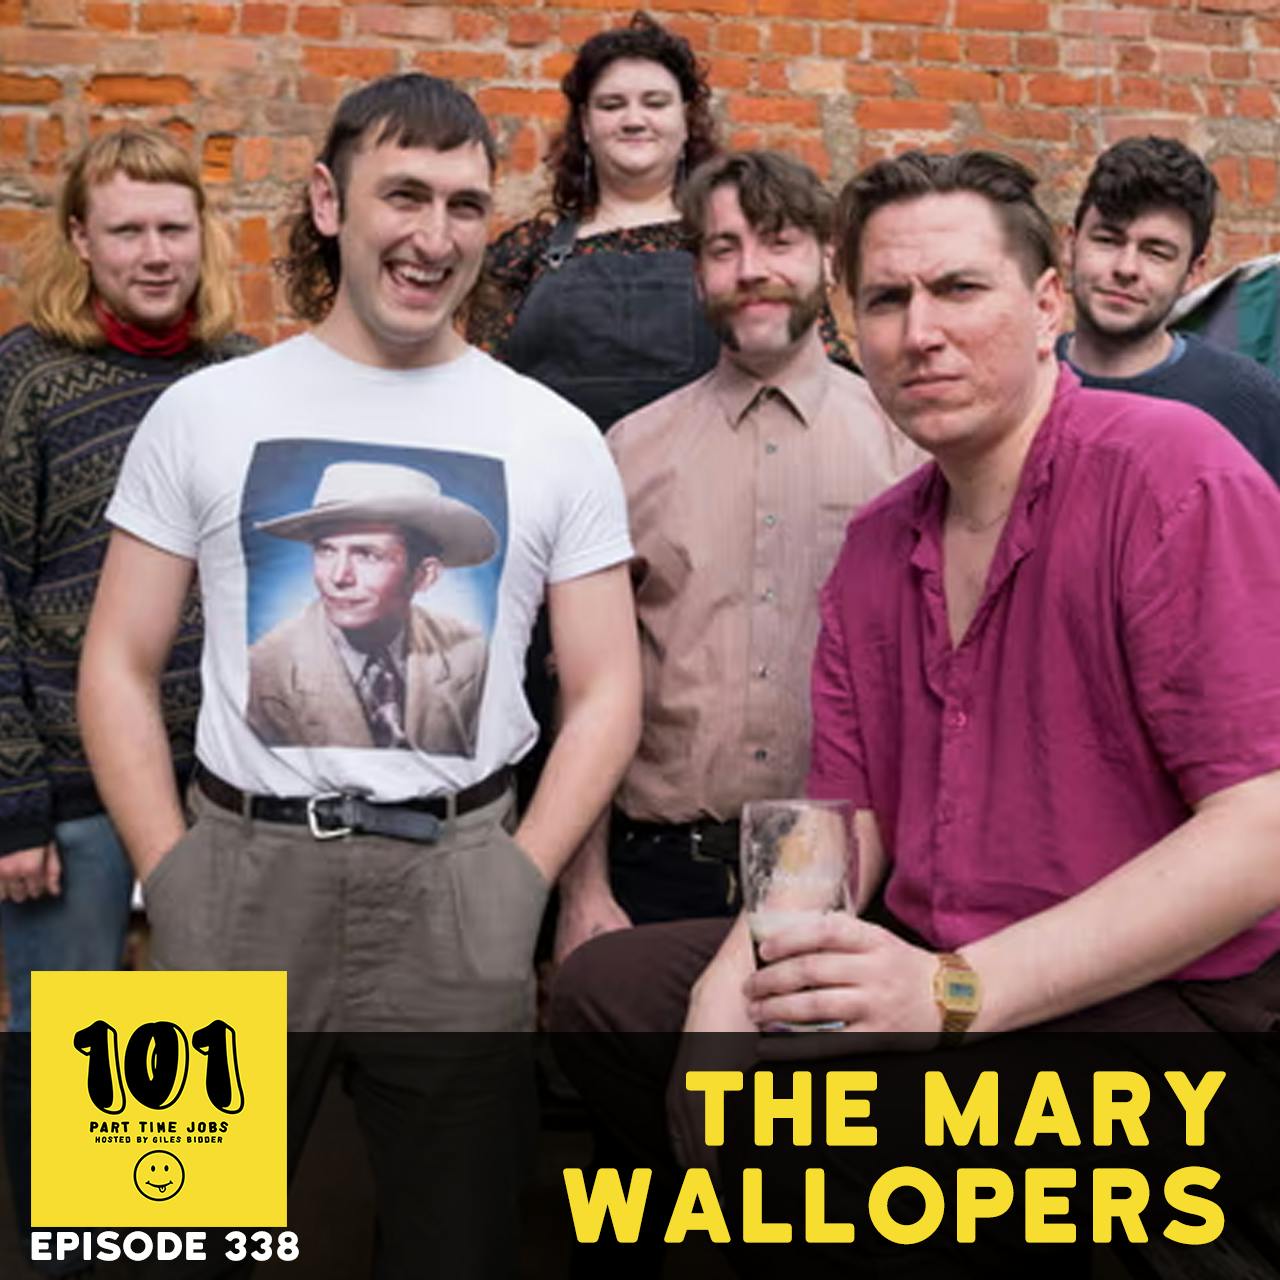 The Mary Wallopers - If you’re willing to risk driving a stolen people carrier